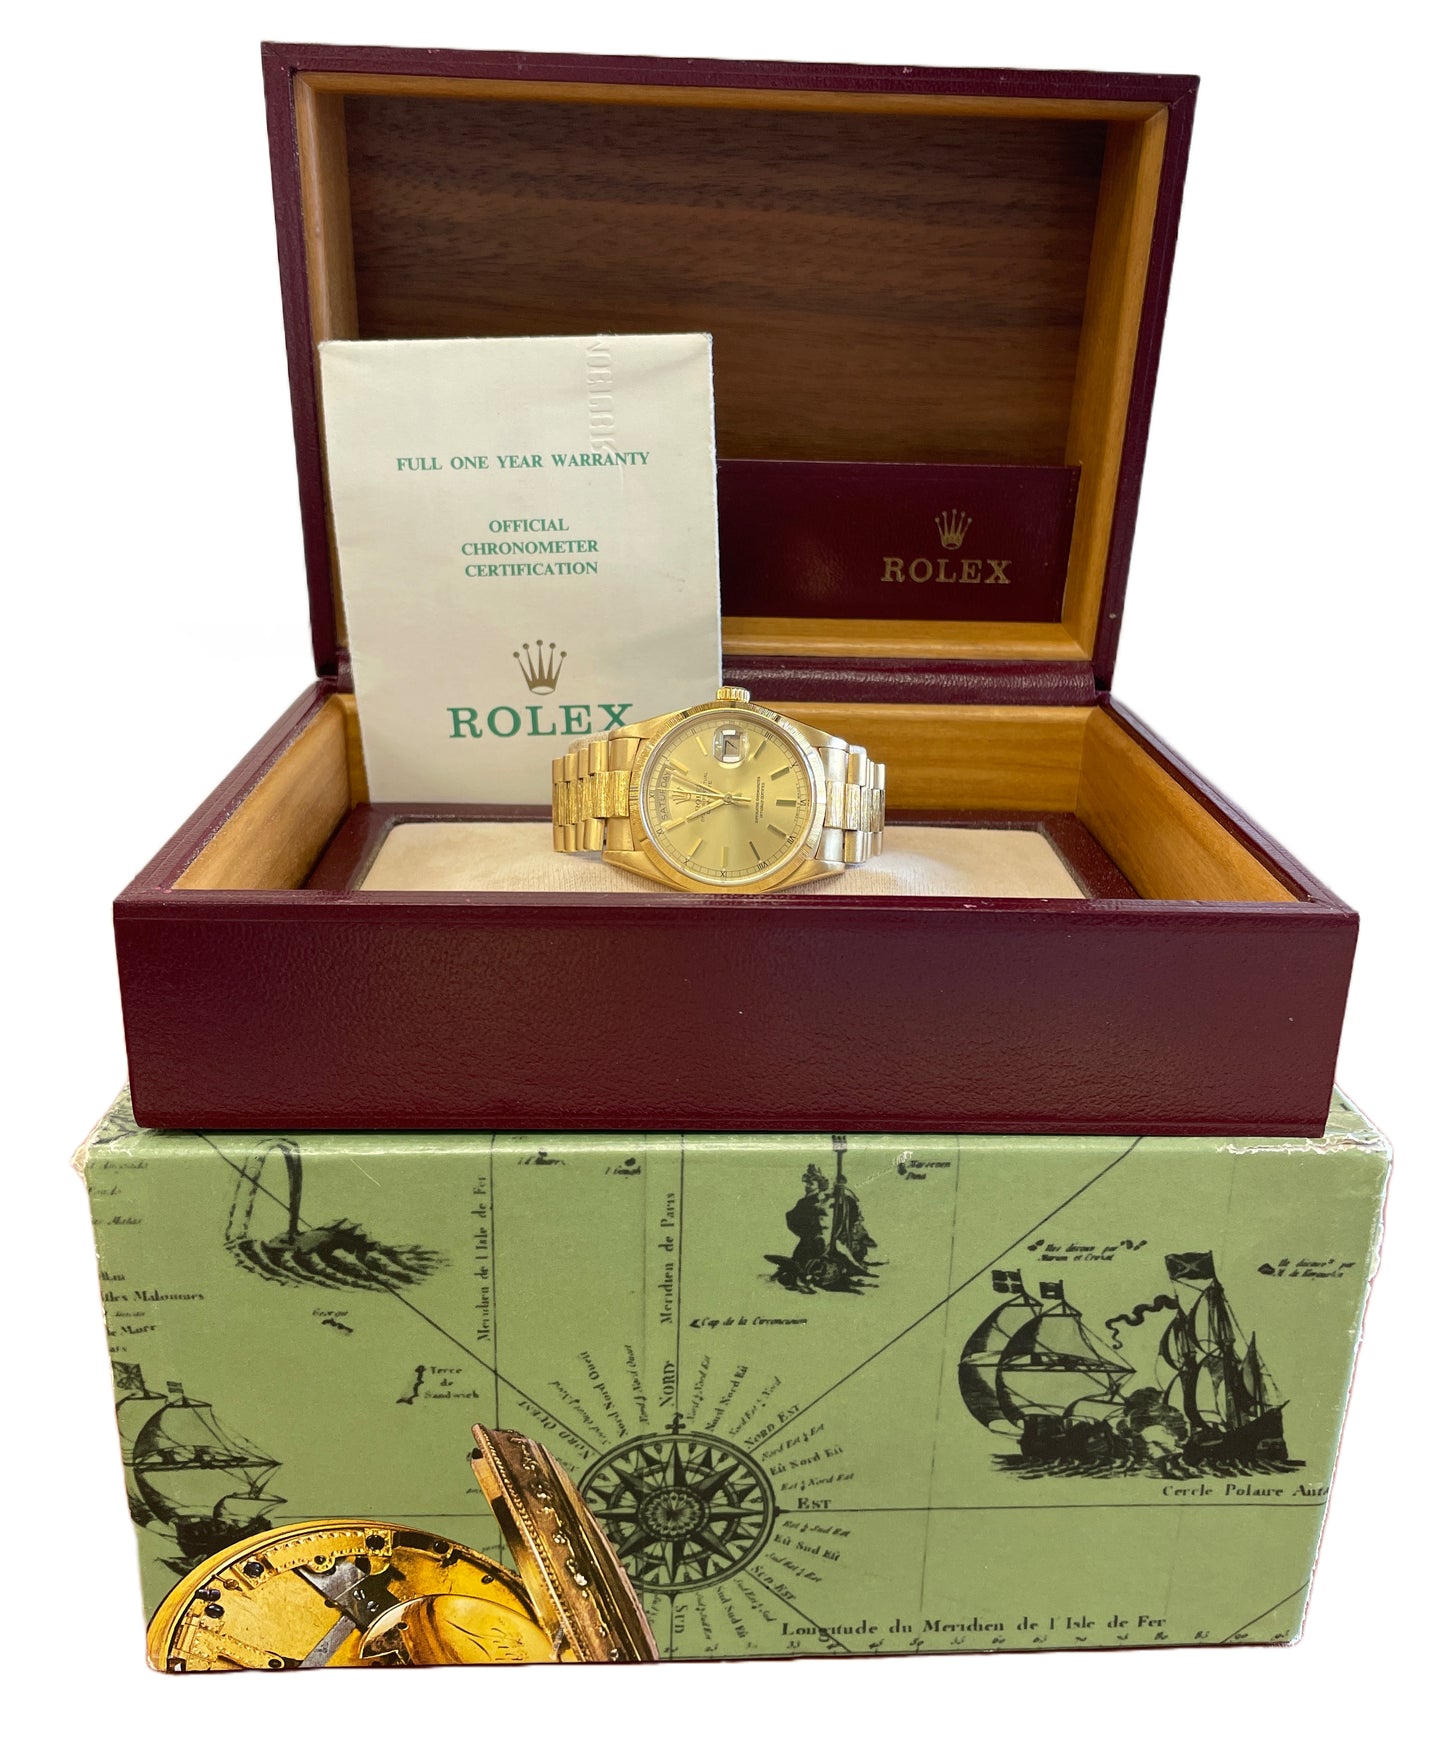 1989 PAPERS Rolex Day-Date President 36mm Champagne BARK Gold Watch 18078 B+P